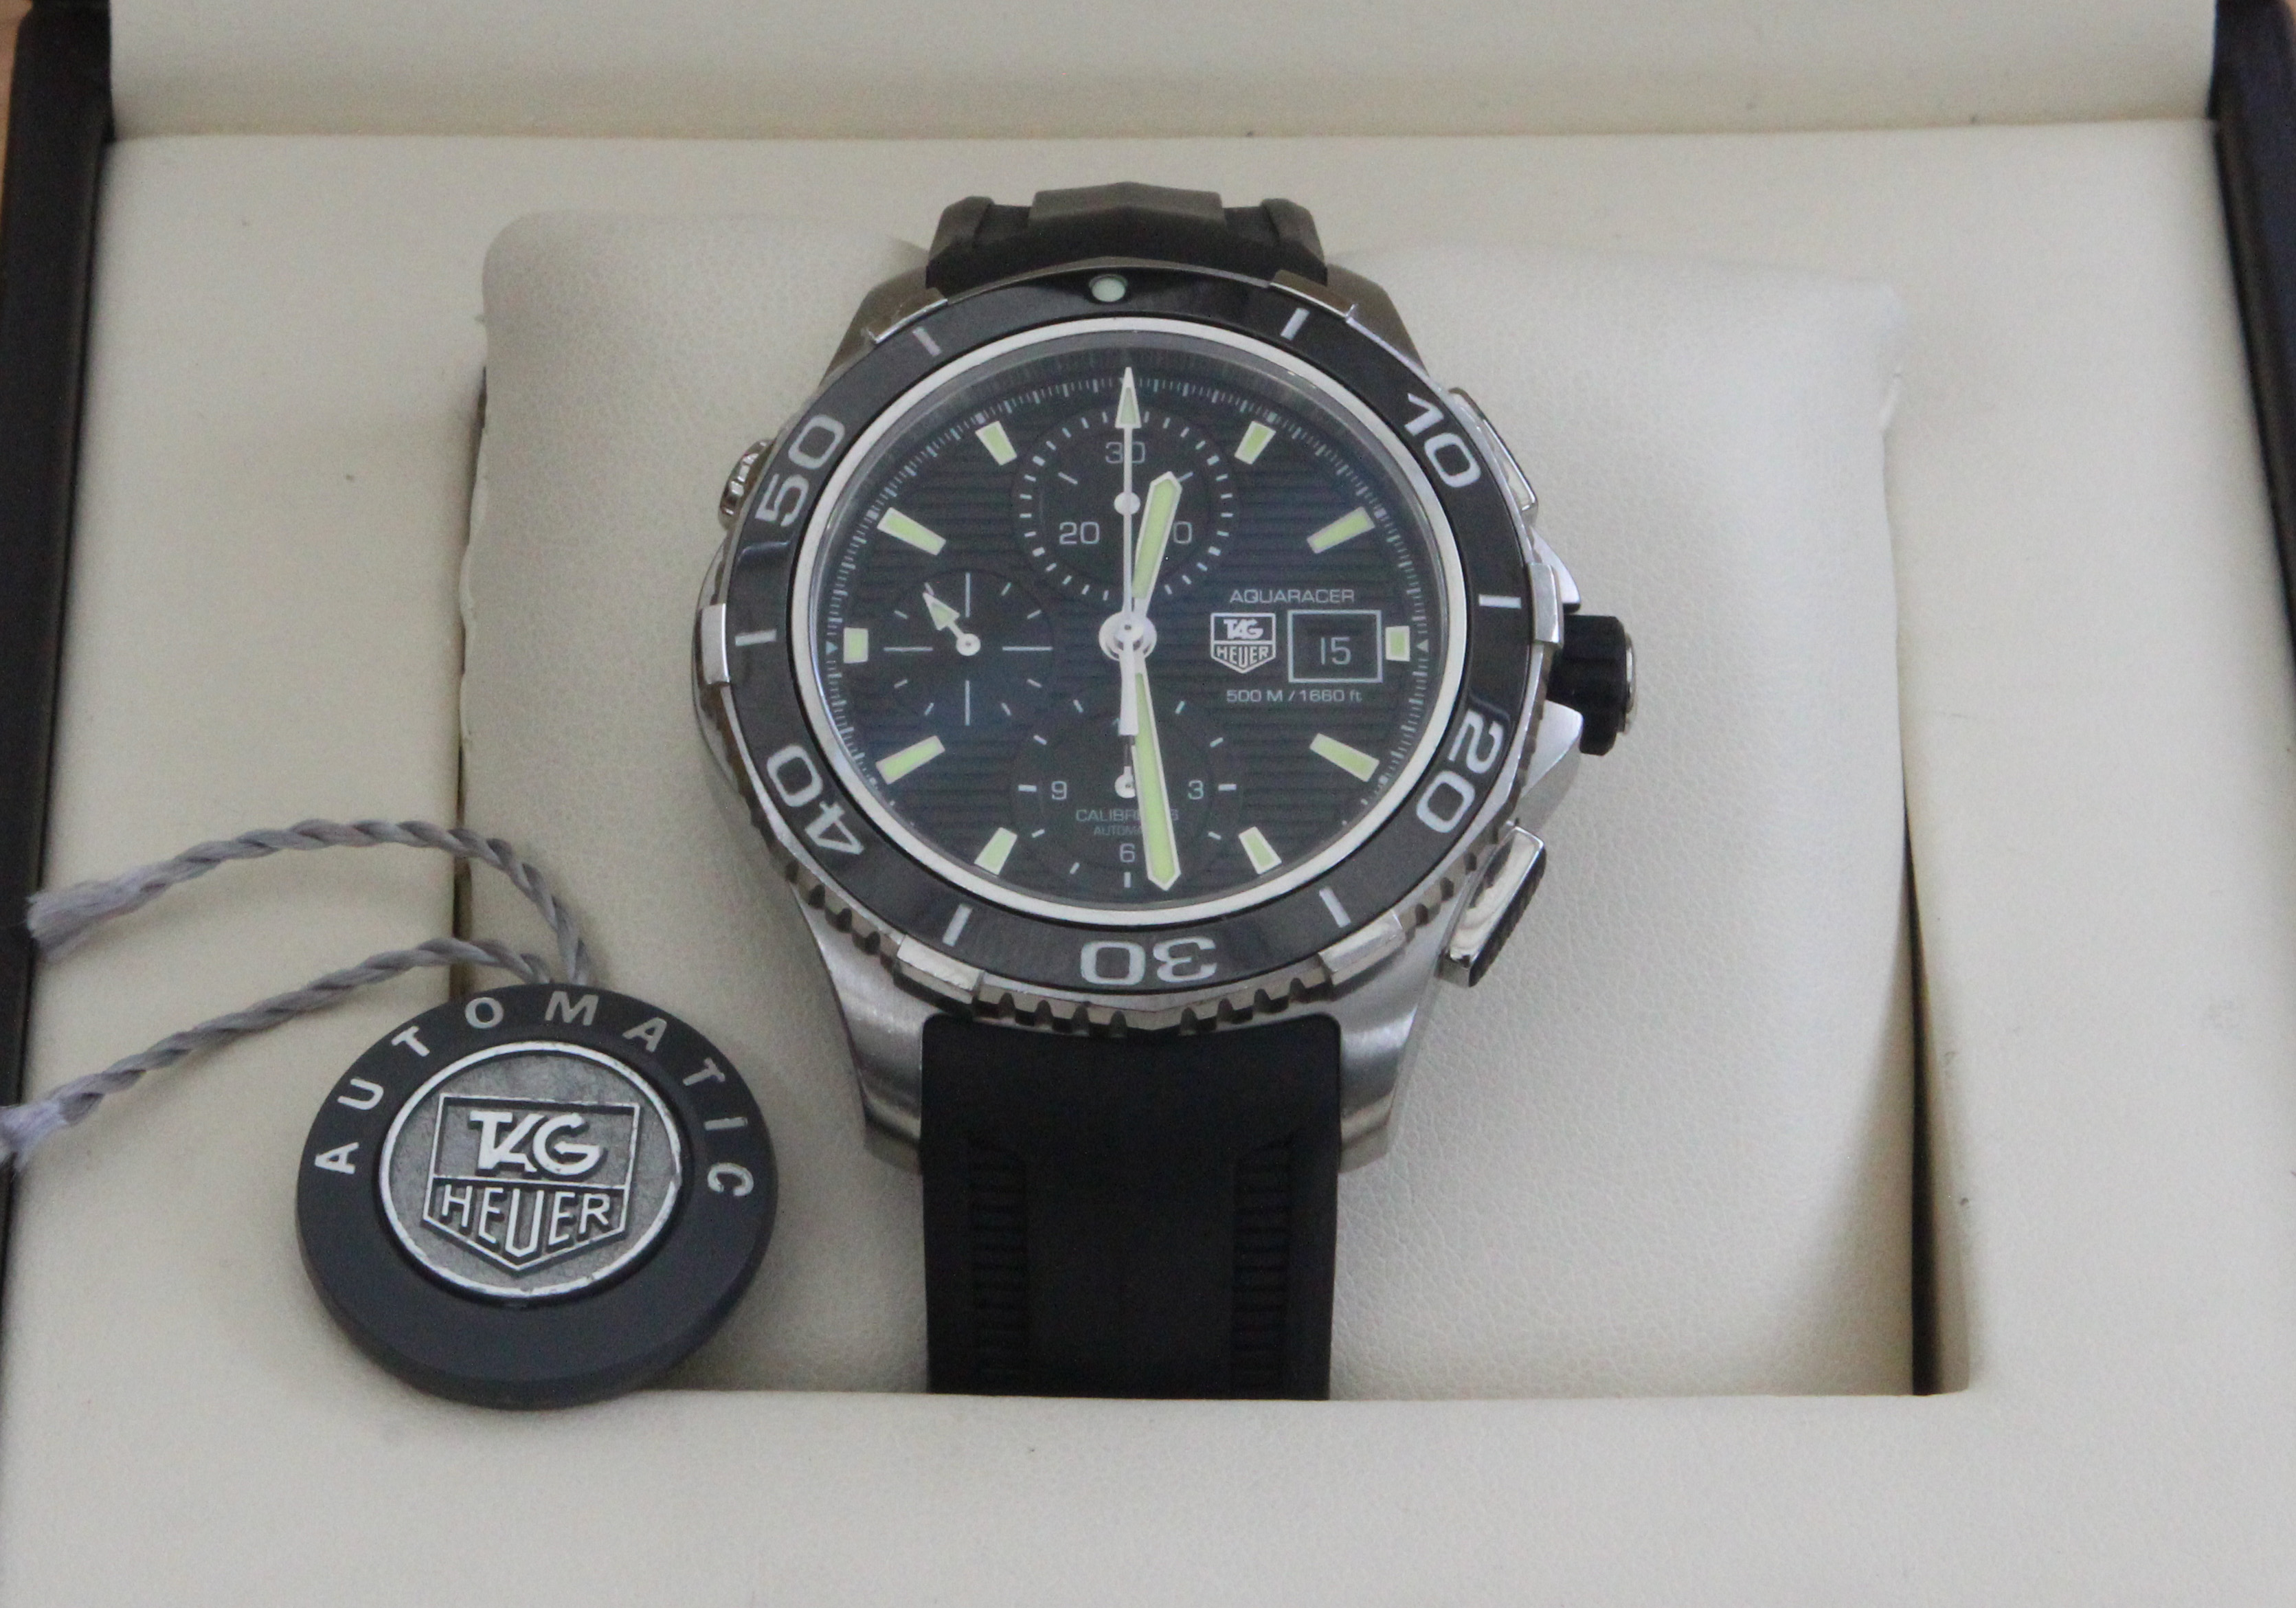 A Tag Heuer Aquaracer Calibre 16 automatic chronograph 500m, water resistant to 500m, helium valve - Image 3 of 8